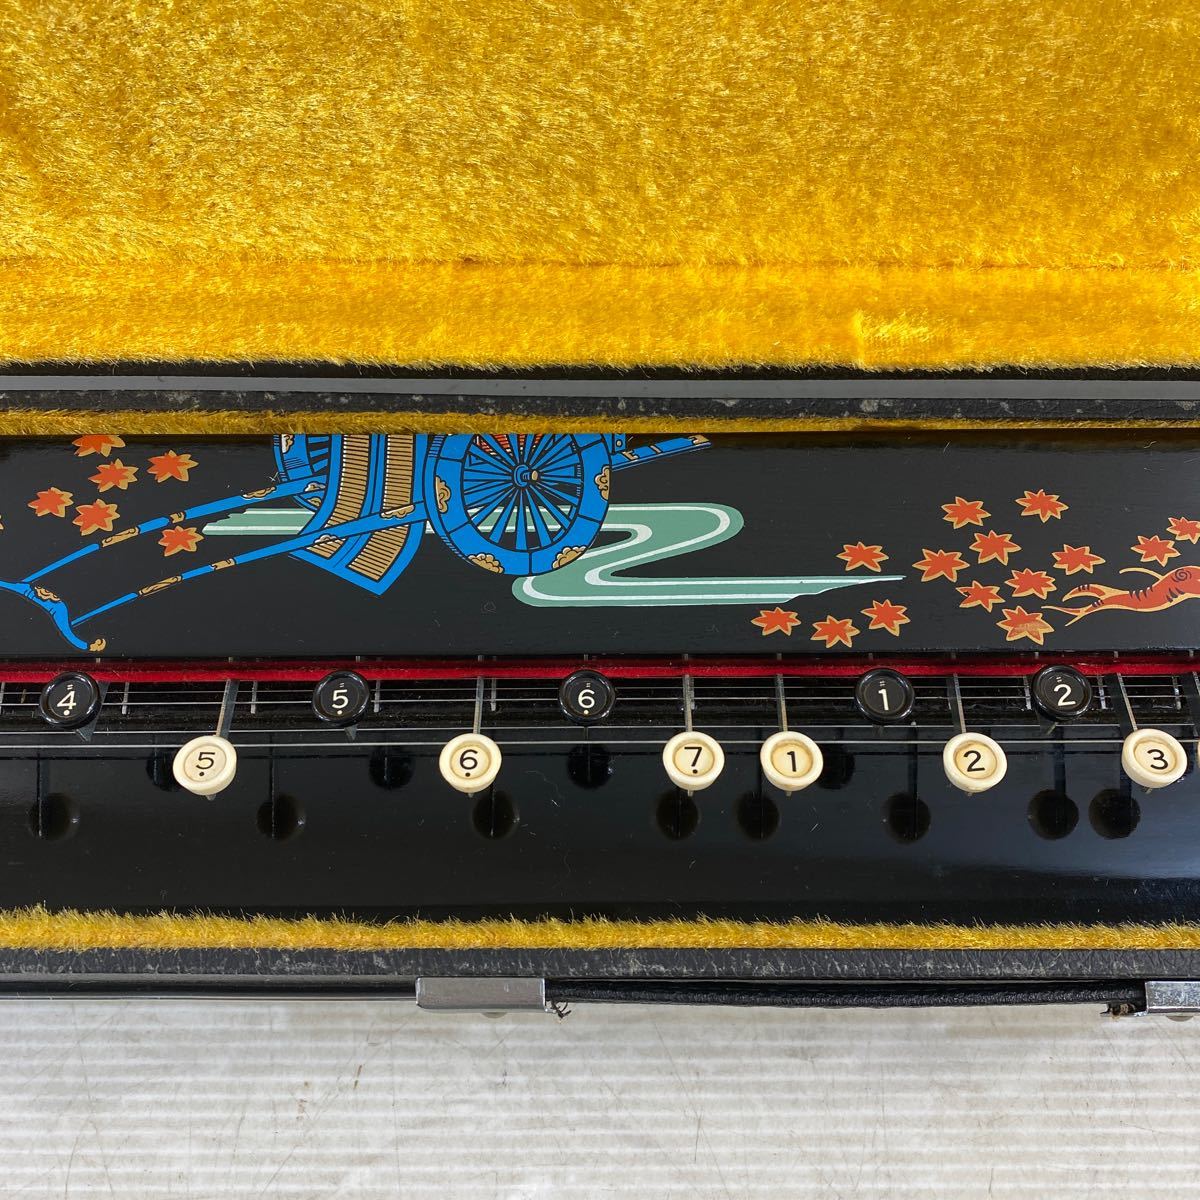 Peacock Harppi- cook harp Taisho koto . place car hard case attaching traditional Japanese musical instrument stringed instruments koto used present condition goods 